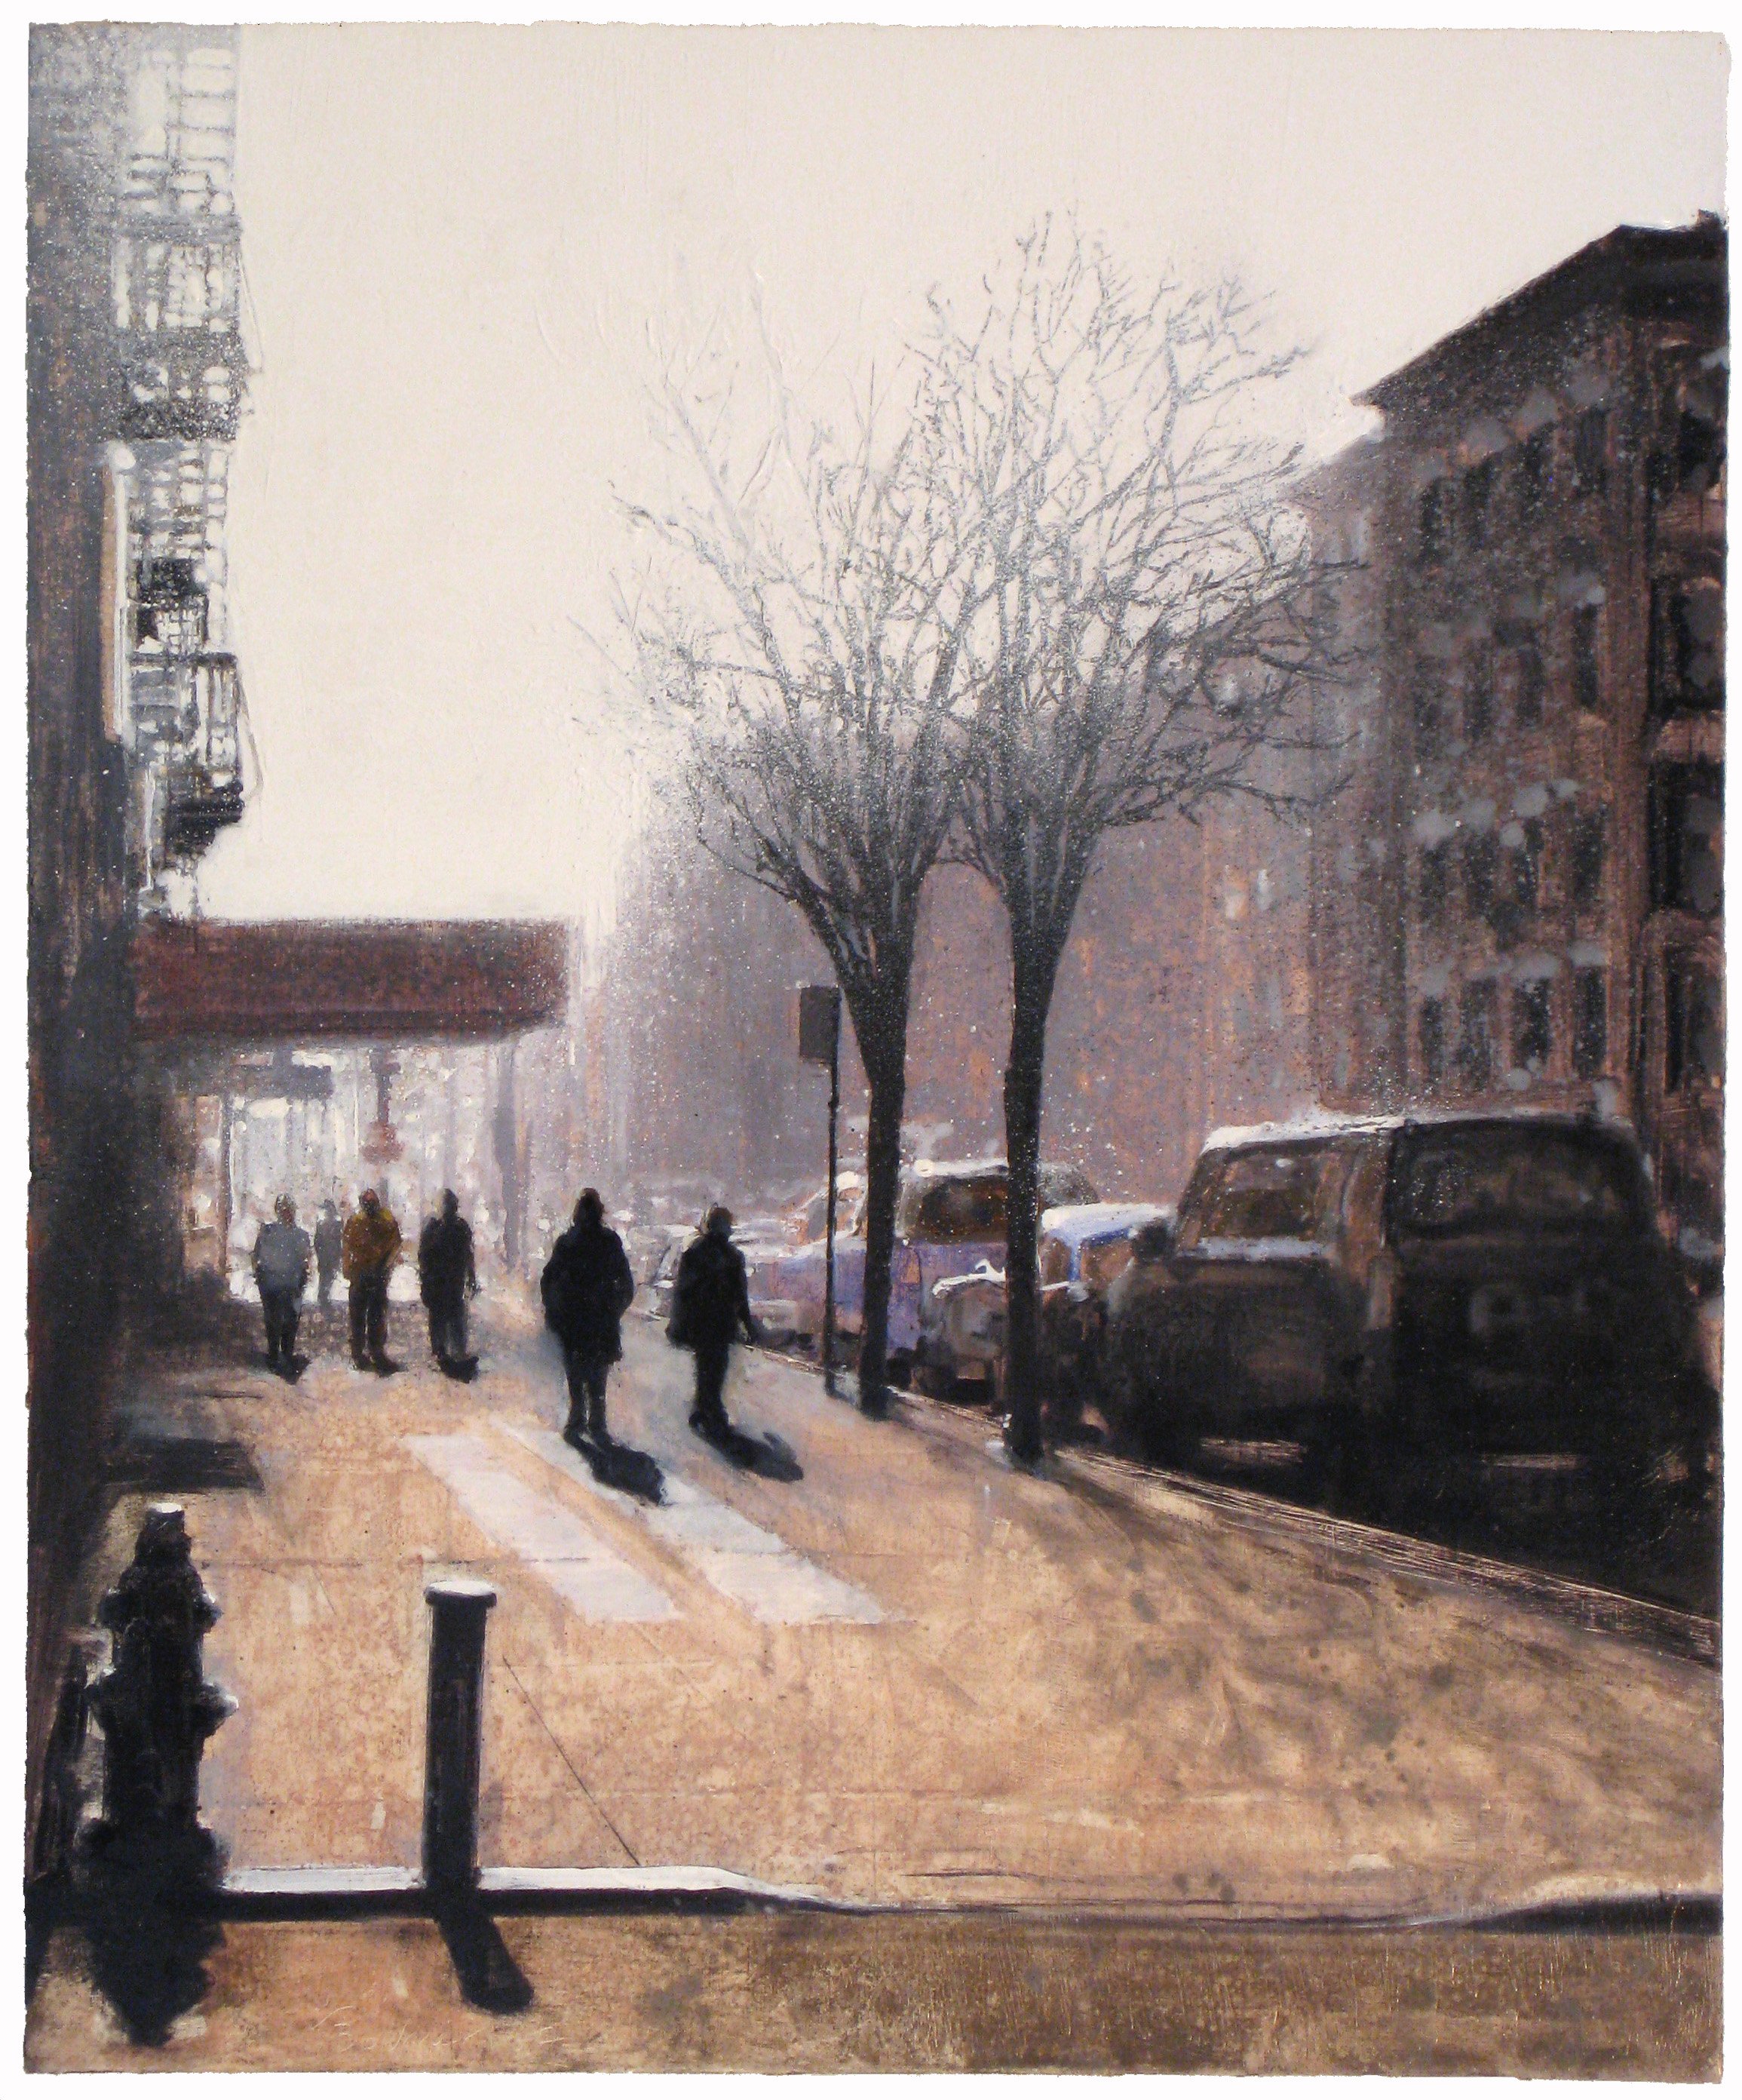  2nd Avenue 28707 24x20 inches (61x51cm) Oil on linen 2007 